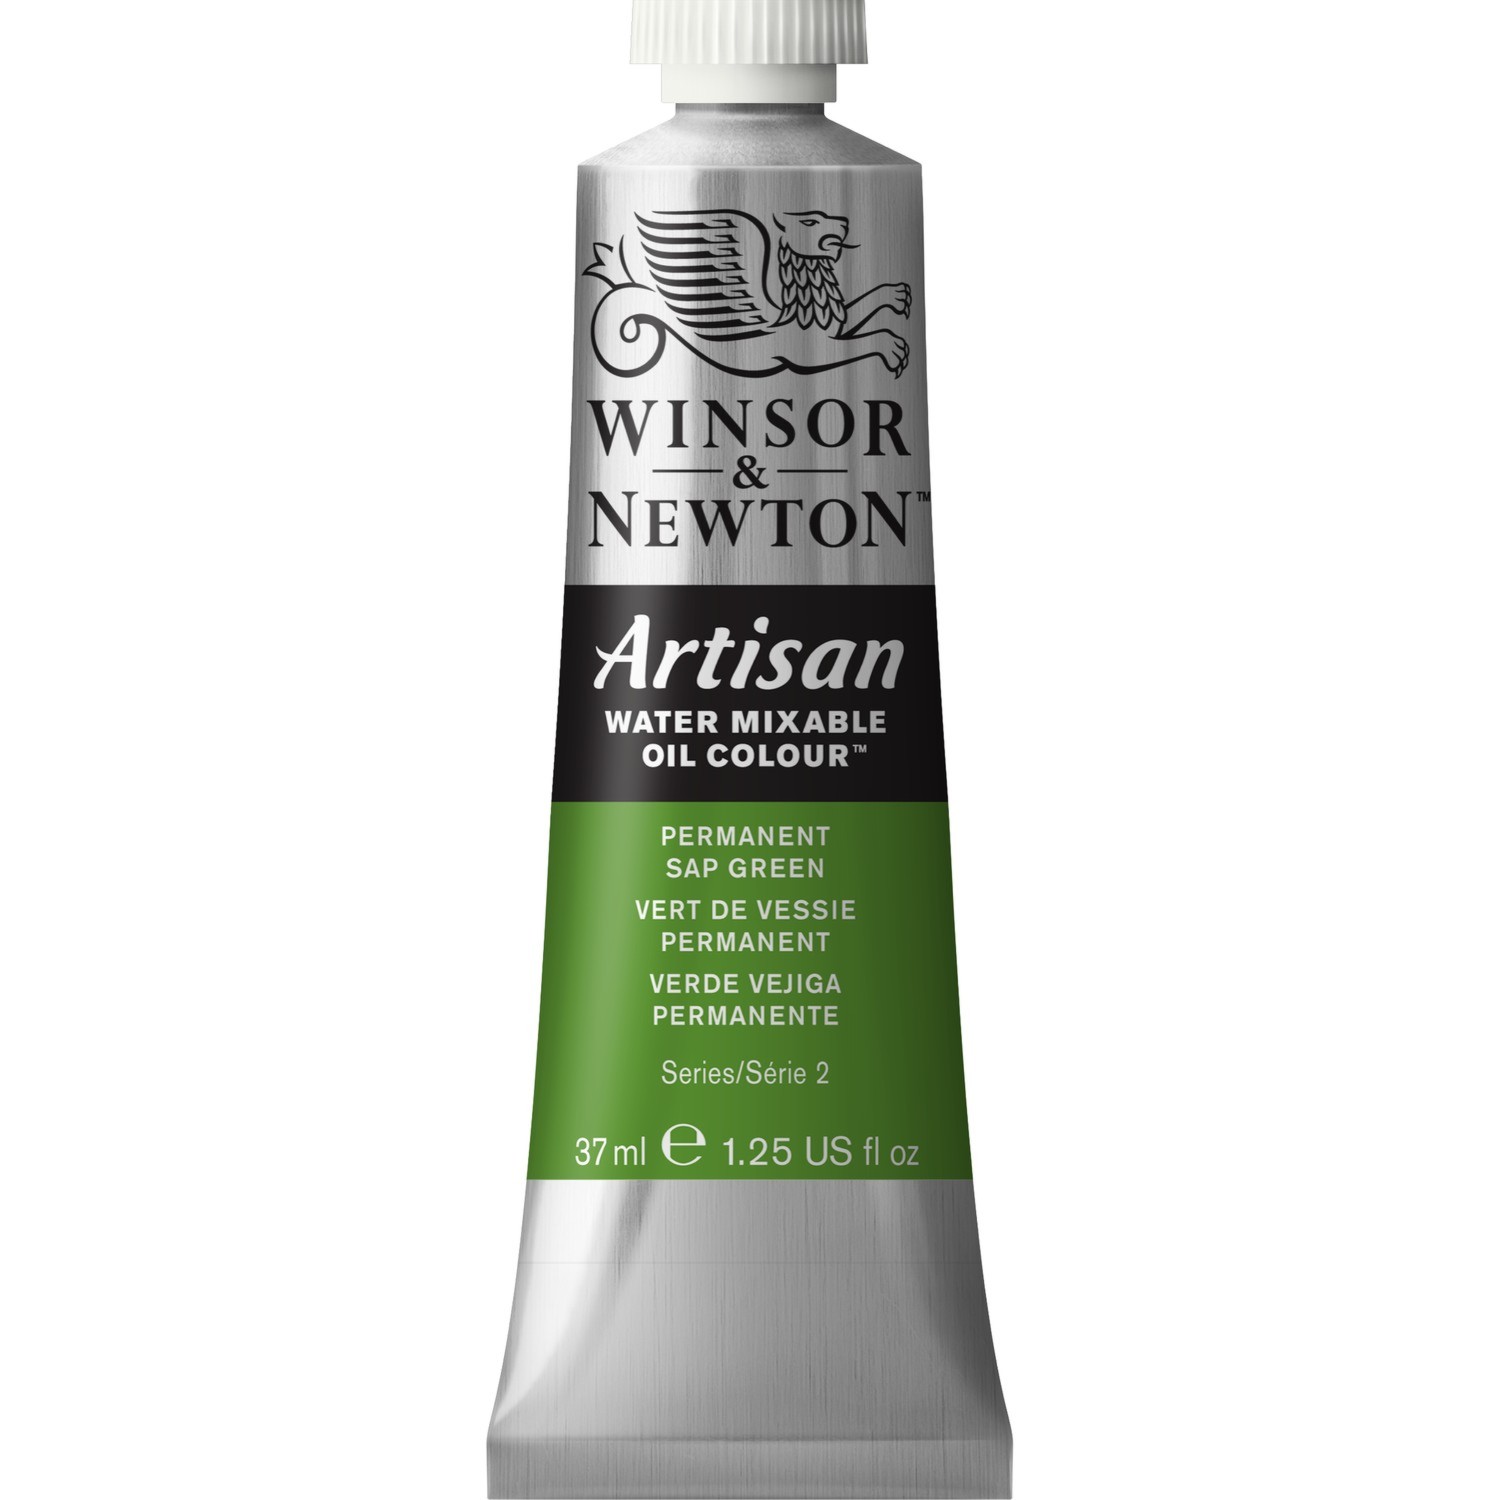 Winsor and Newton 37ml Artisan Mixable Oil Paint - Permanent Sap Green Image 1